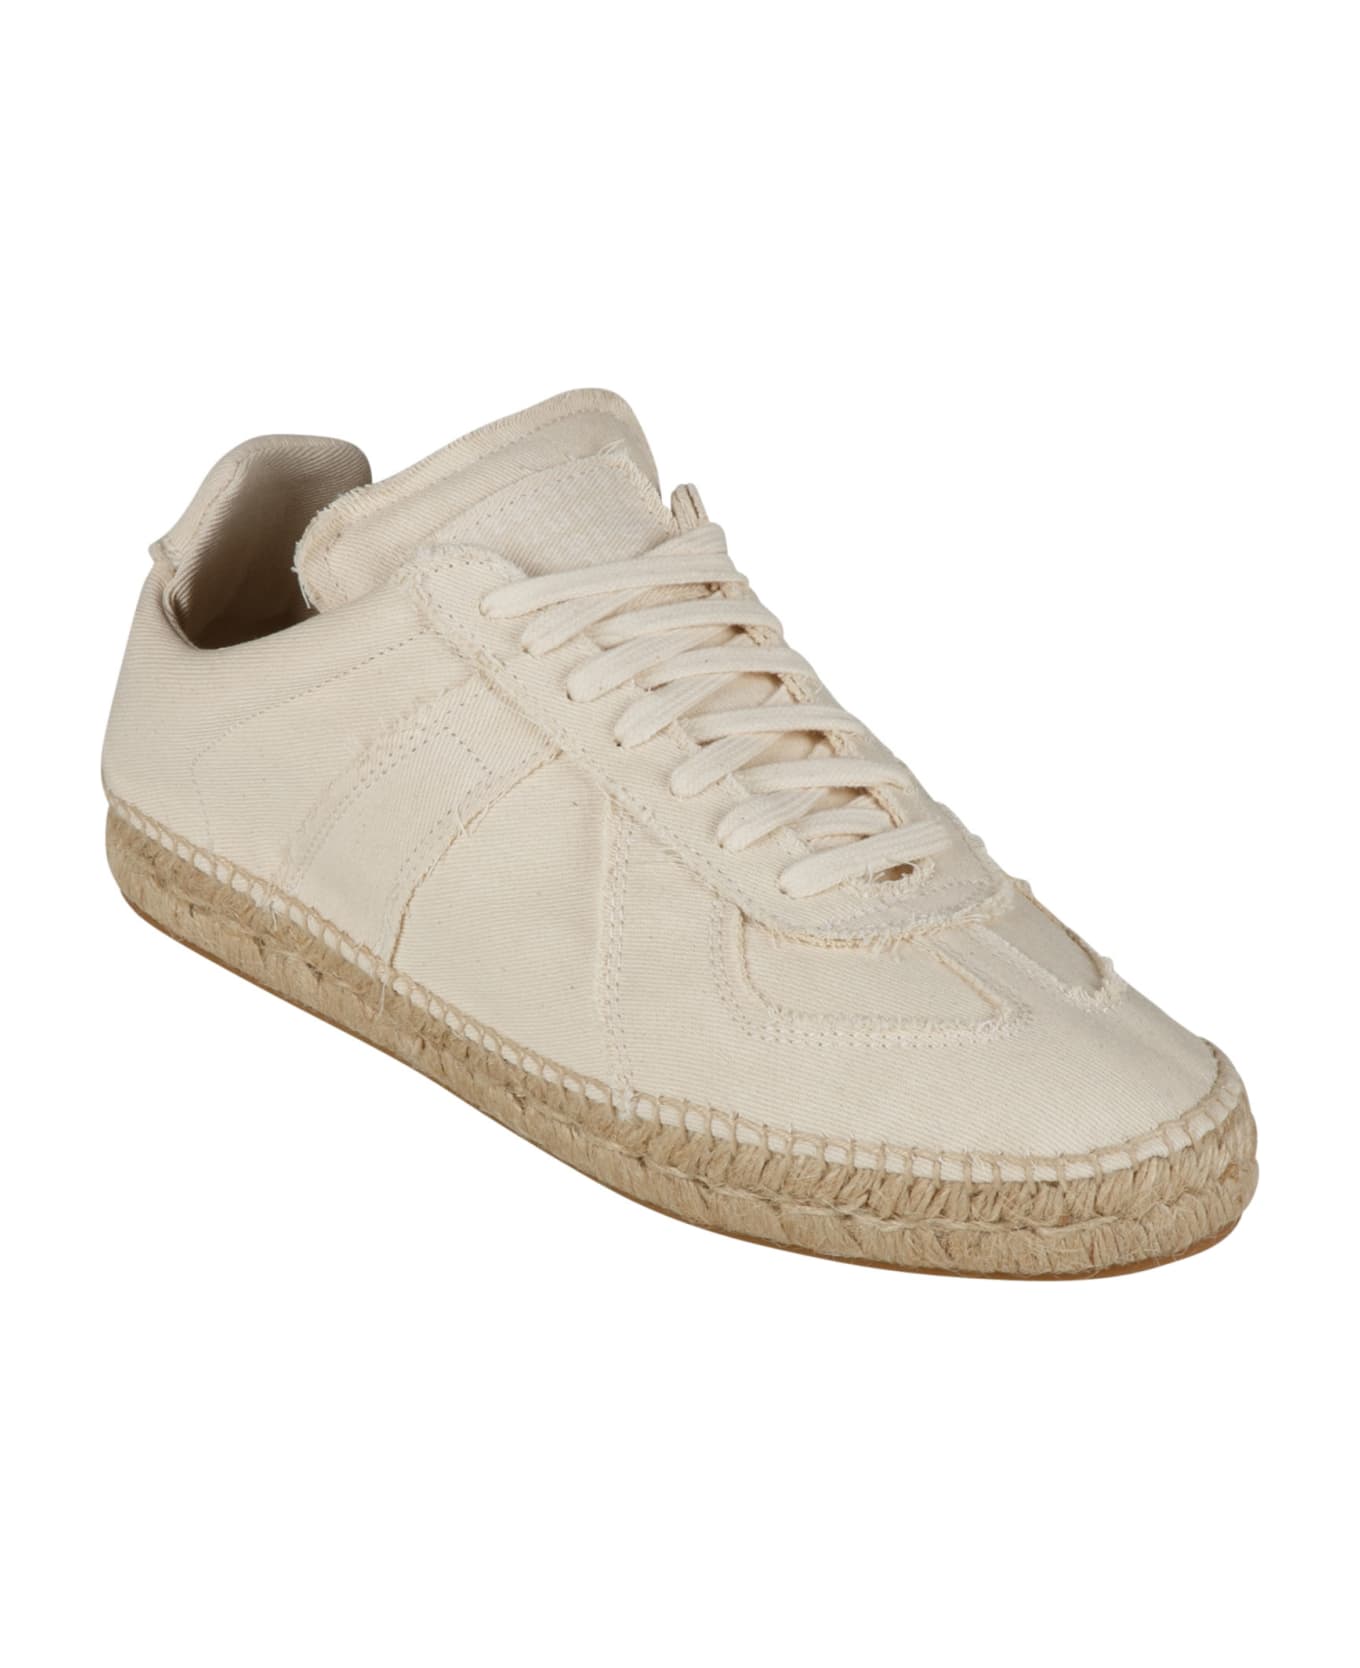 Maison Margiela Low-top Lace Up Sneakers - Birch White